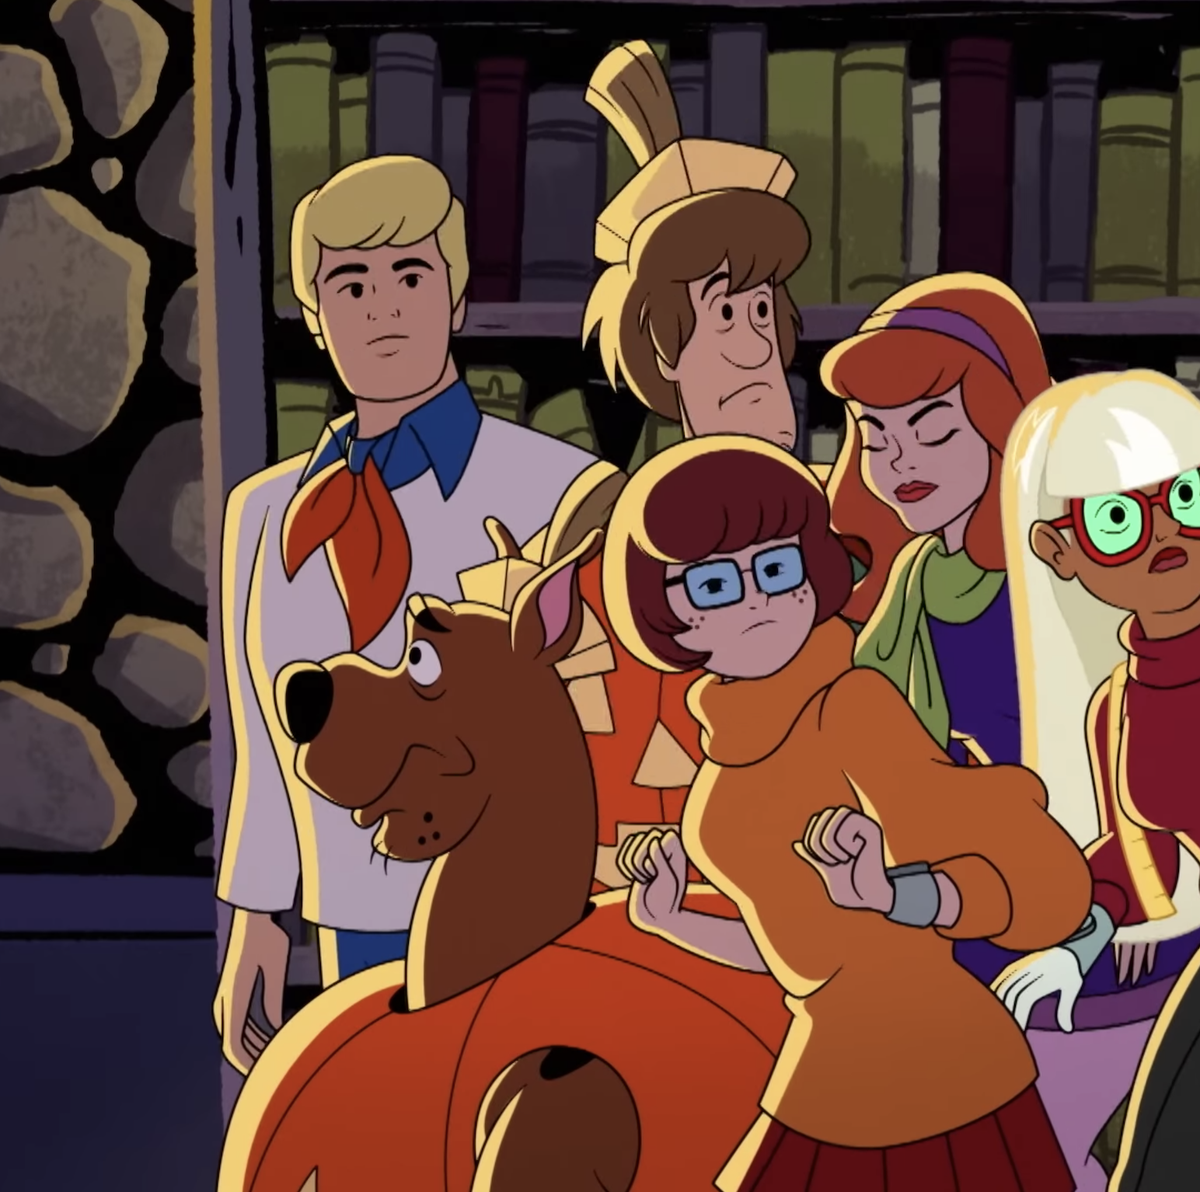 Velma in “Scooby-Doo” Is Officially Gay